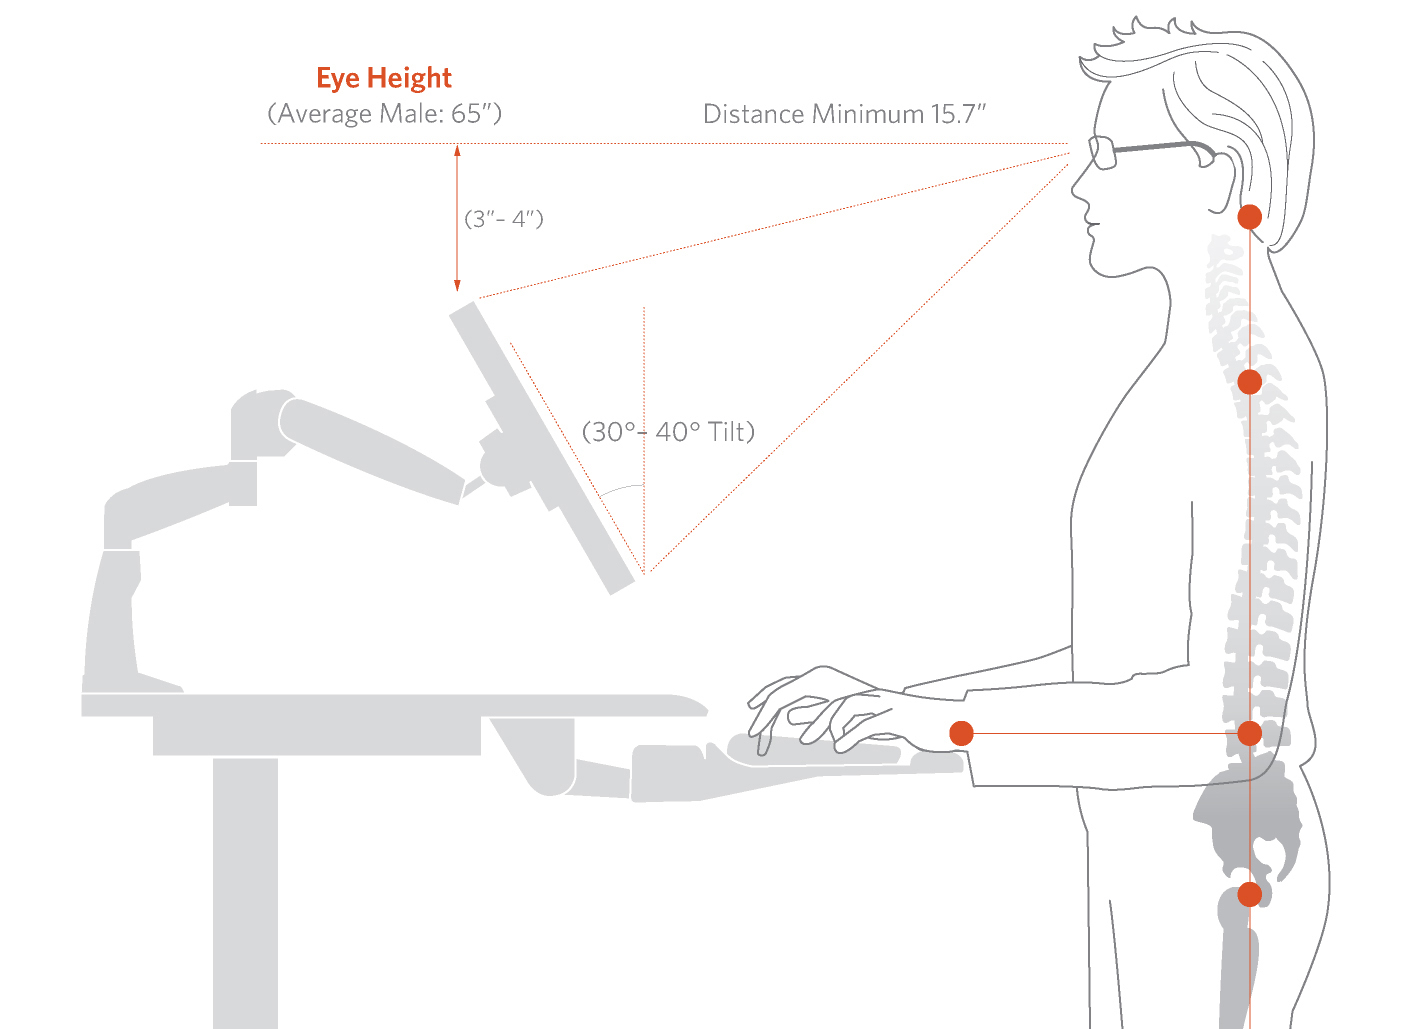 Facts About Standing Desks